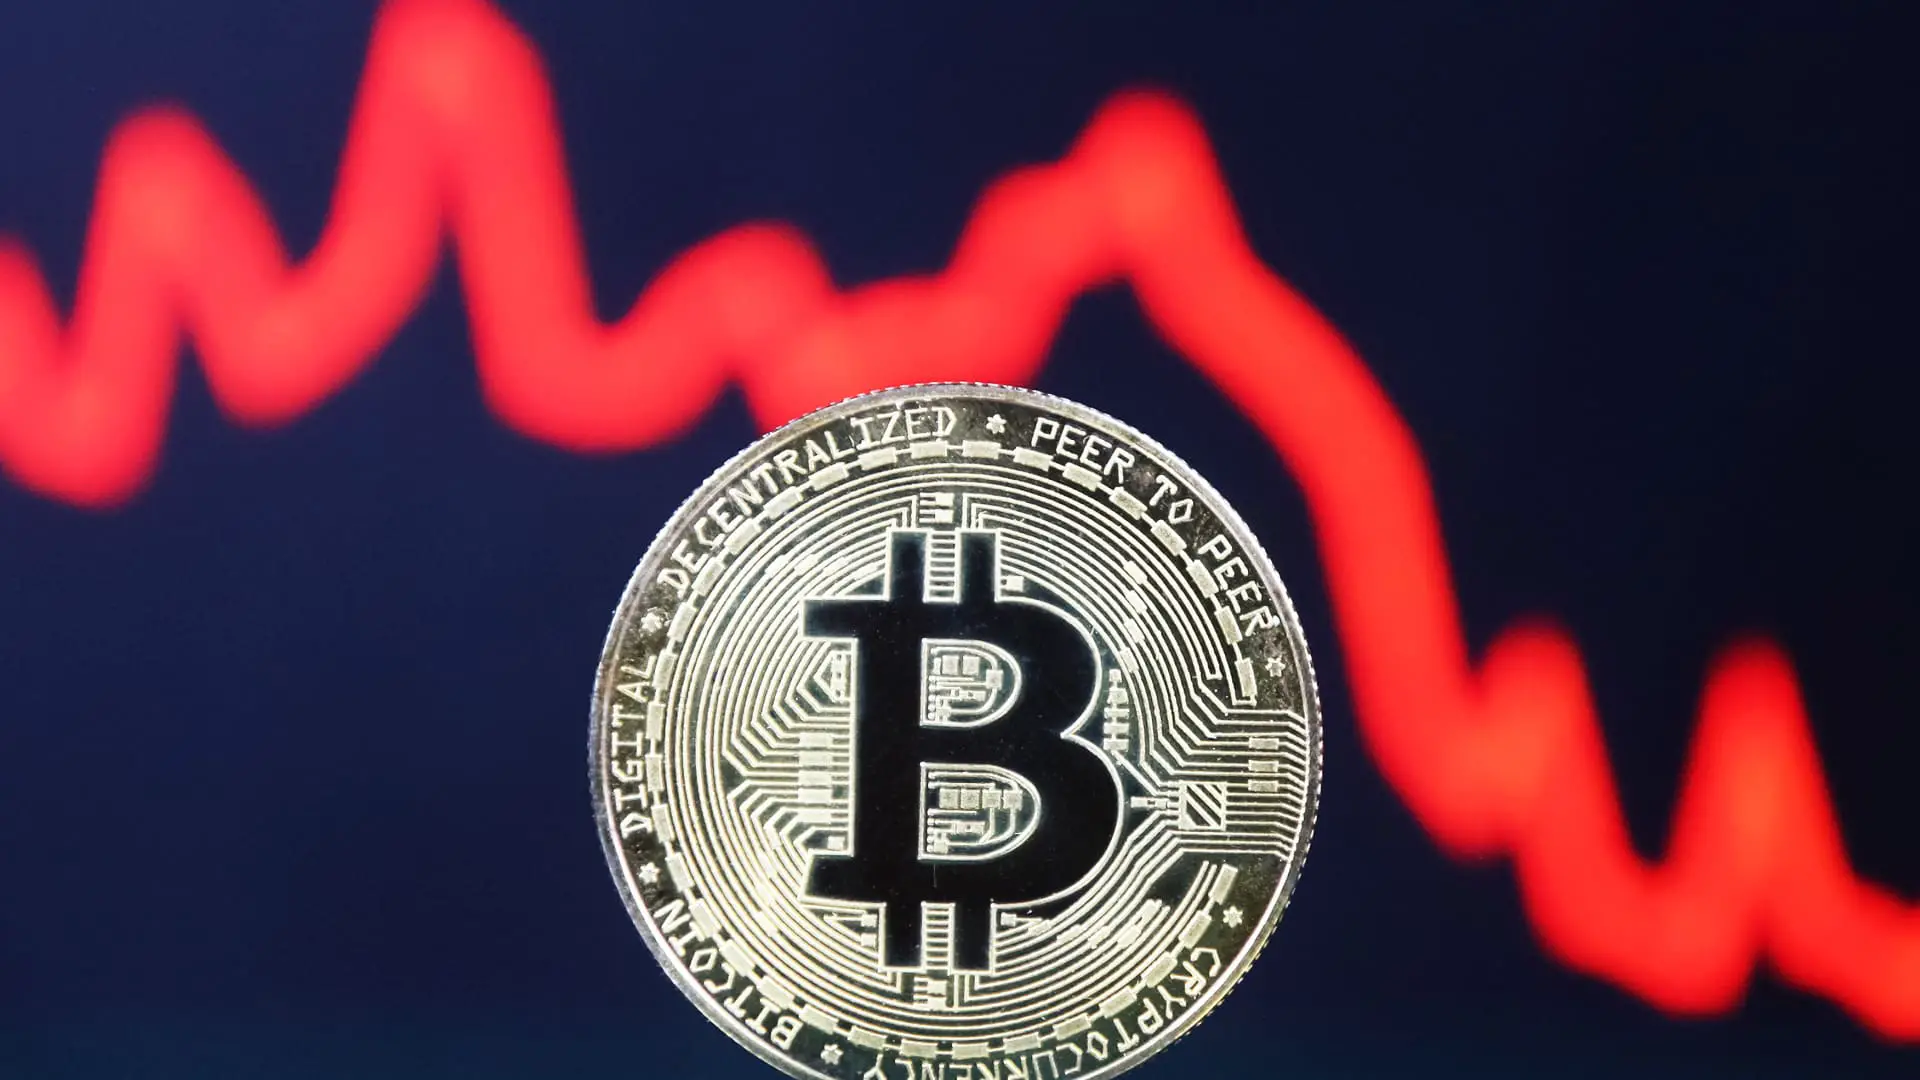 What to know about investing in cryptocurrency amid volatility